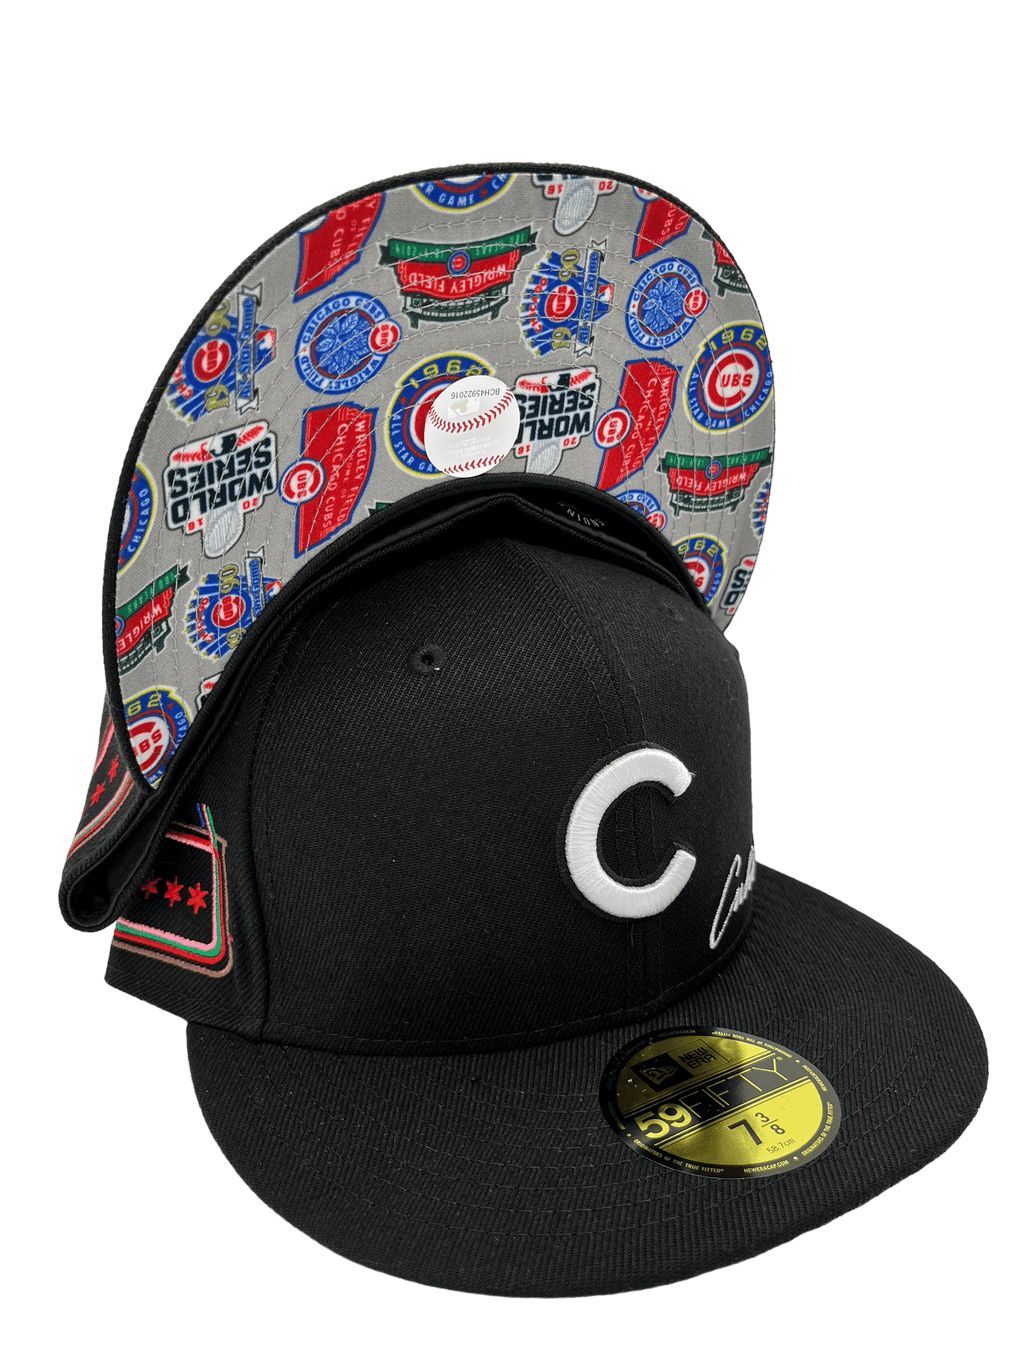 New Era MLB CHICAGO CUBS VS CHICAGO WHITE SOX 9FIFTY HAT